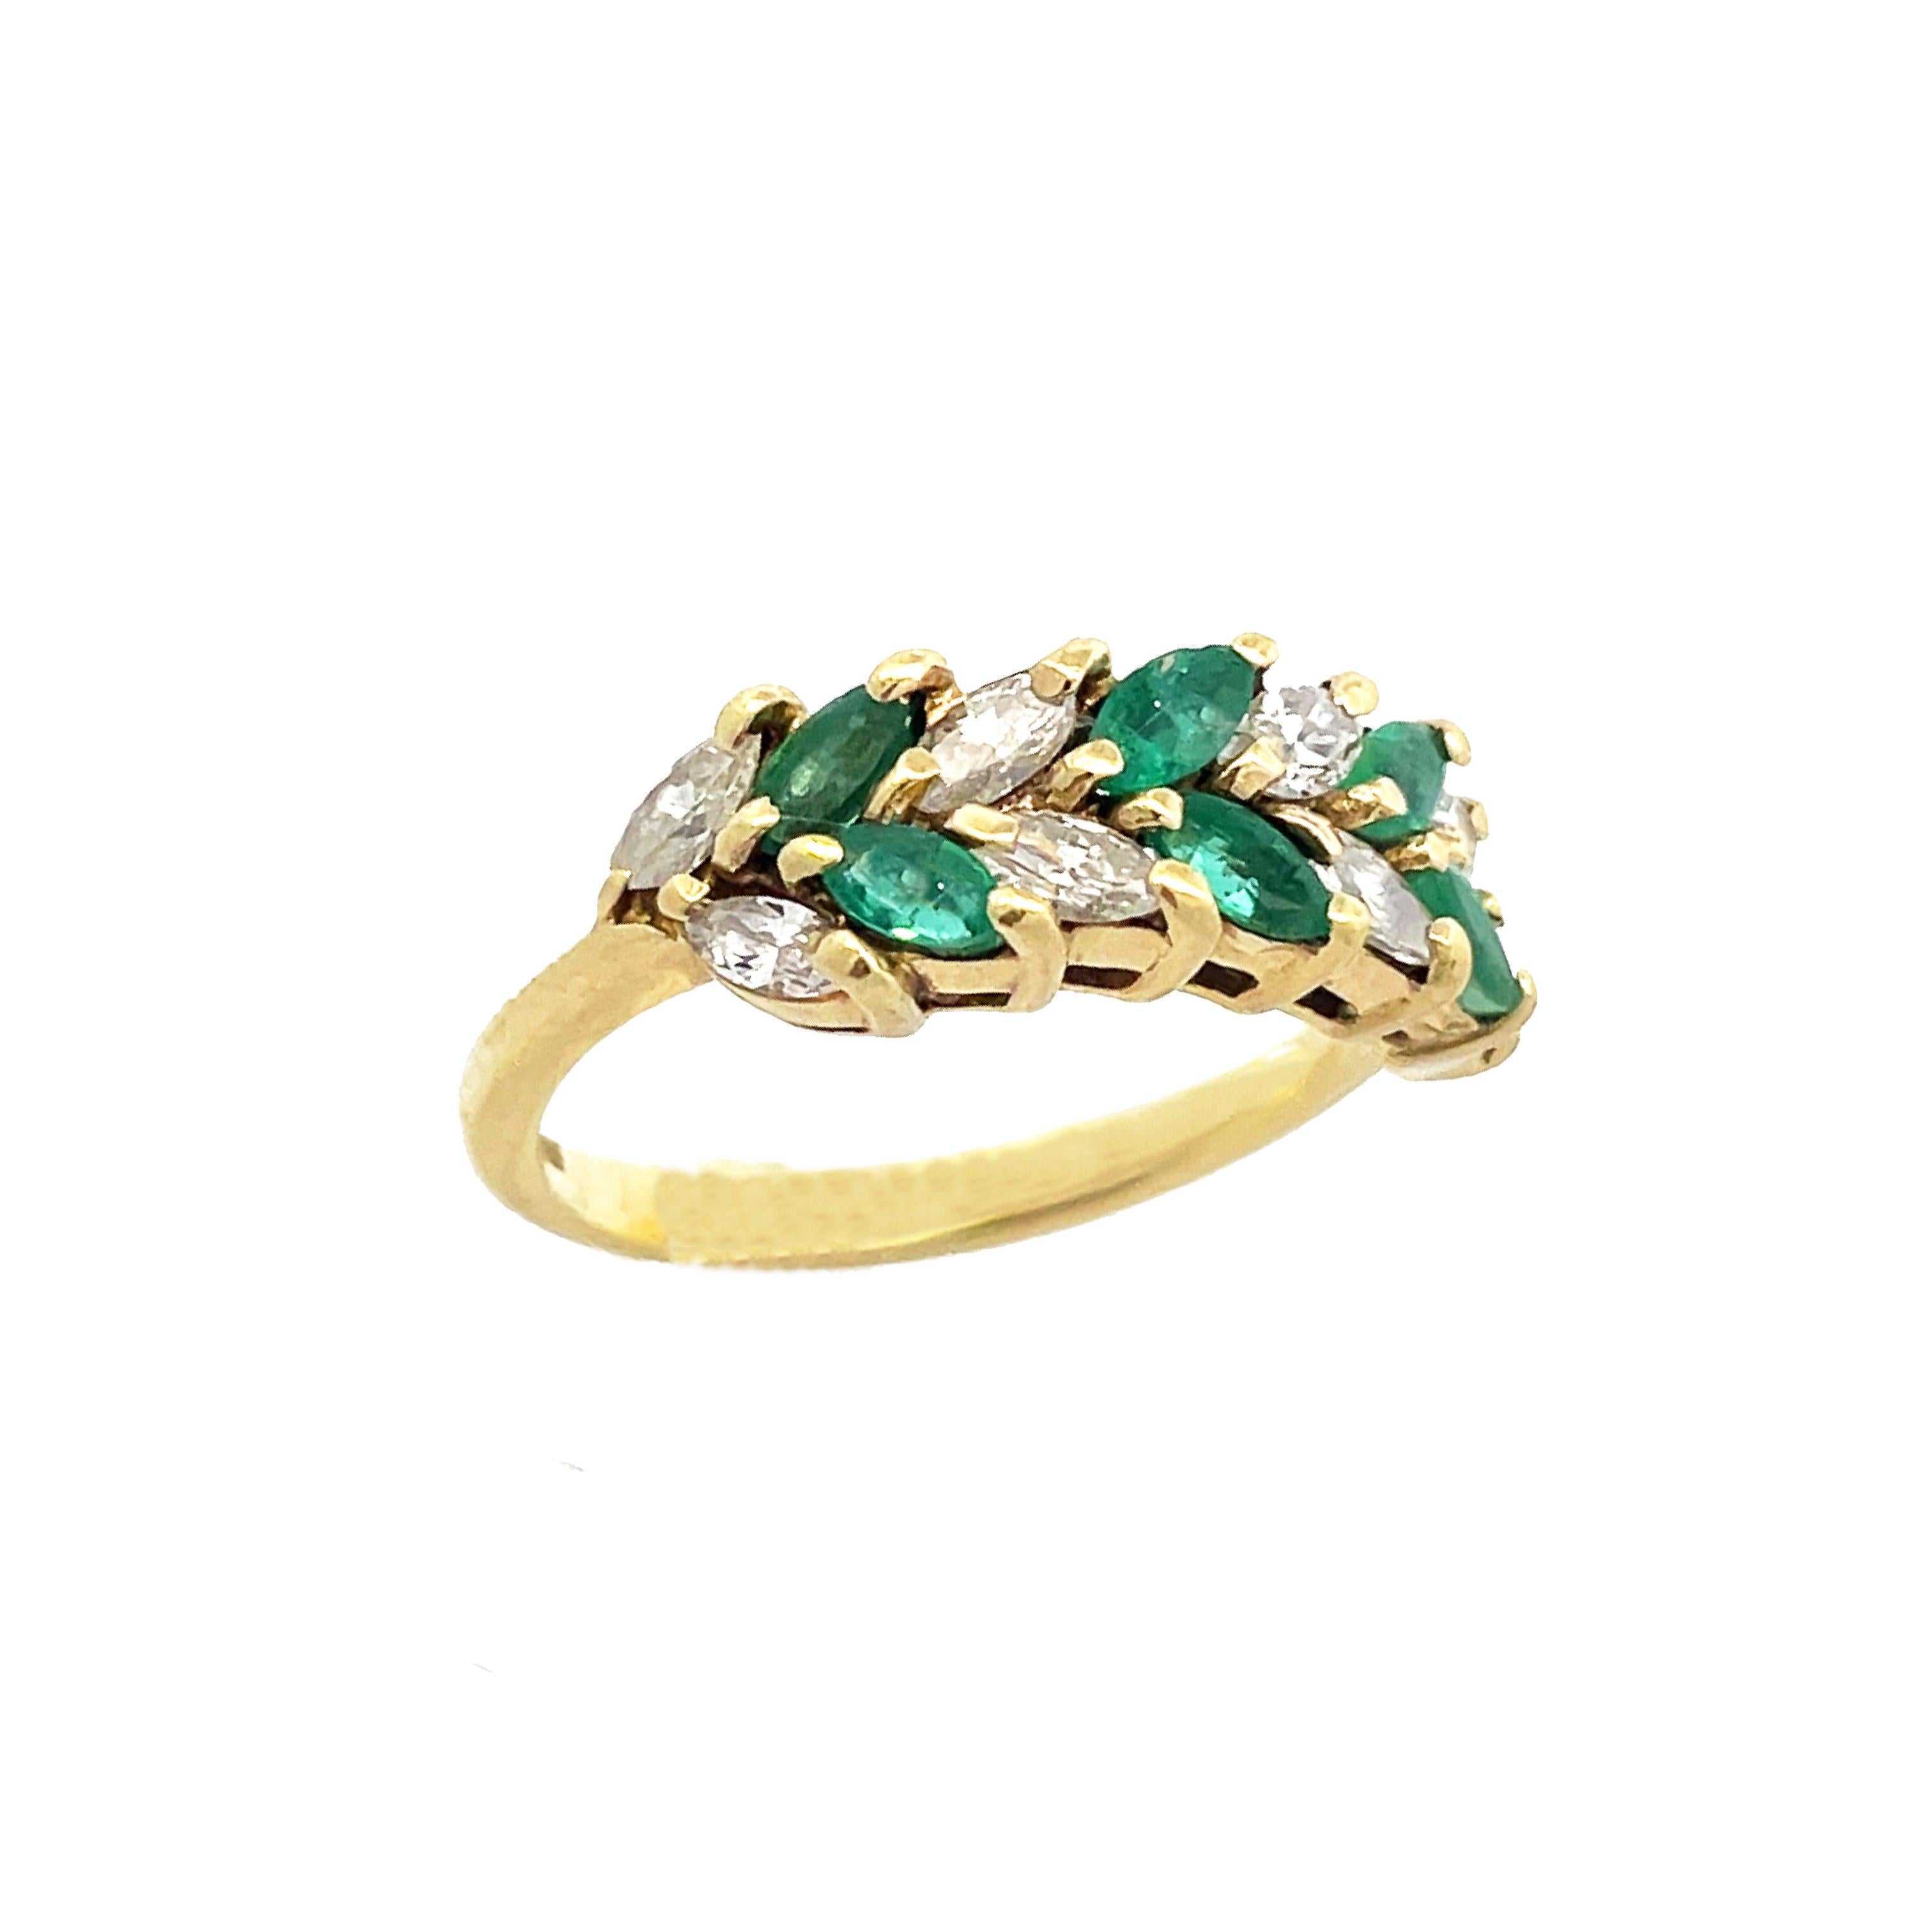 Contemporary 18K Yellow Gold Emerald and Diamond Ring In Excellent Condition For Sale In Lexington, KY